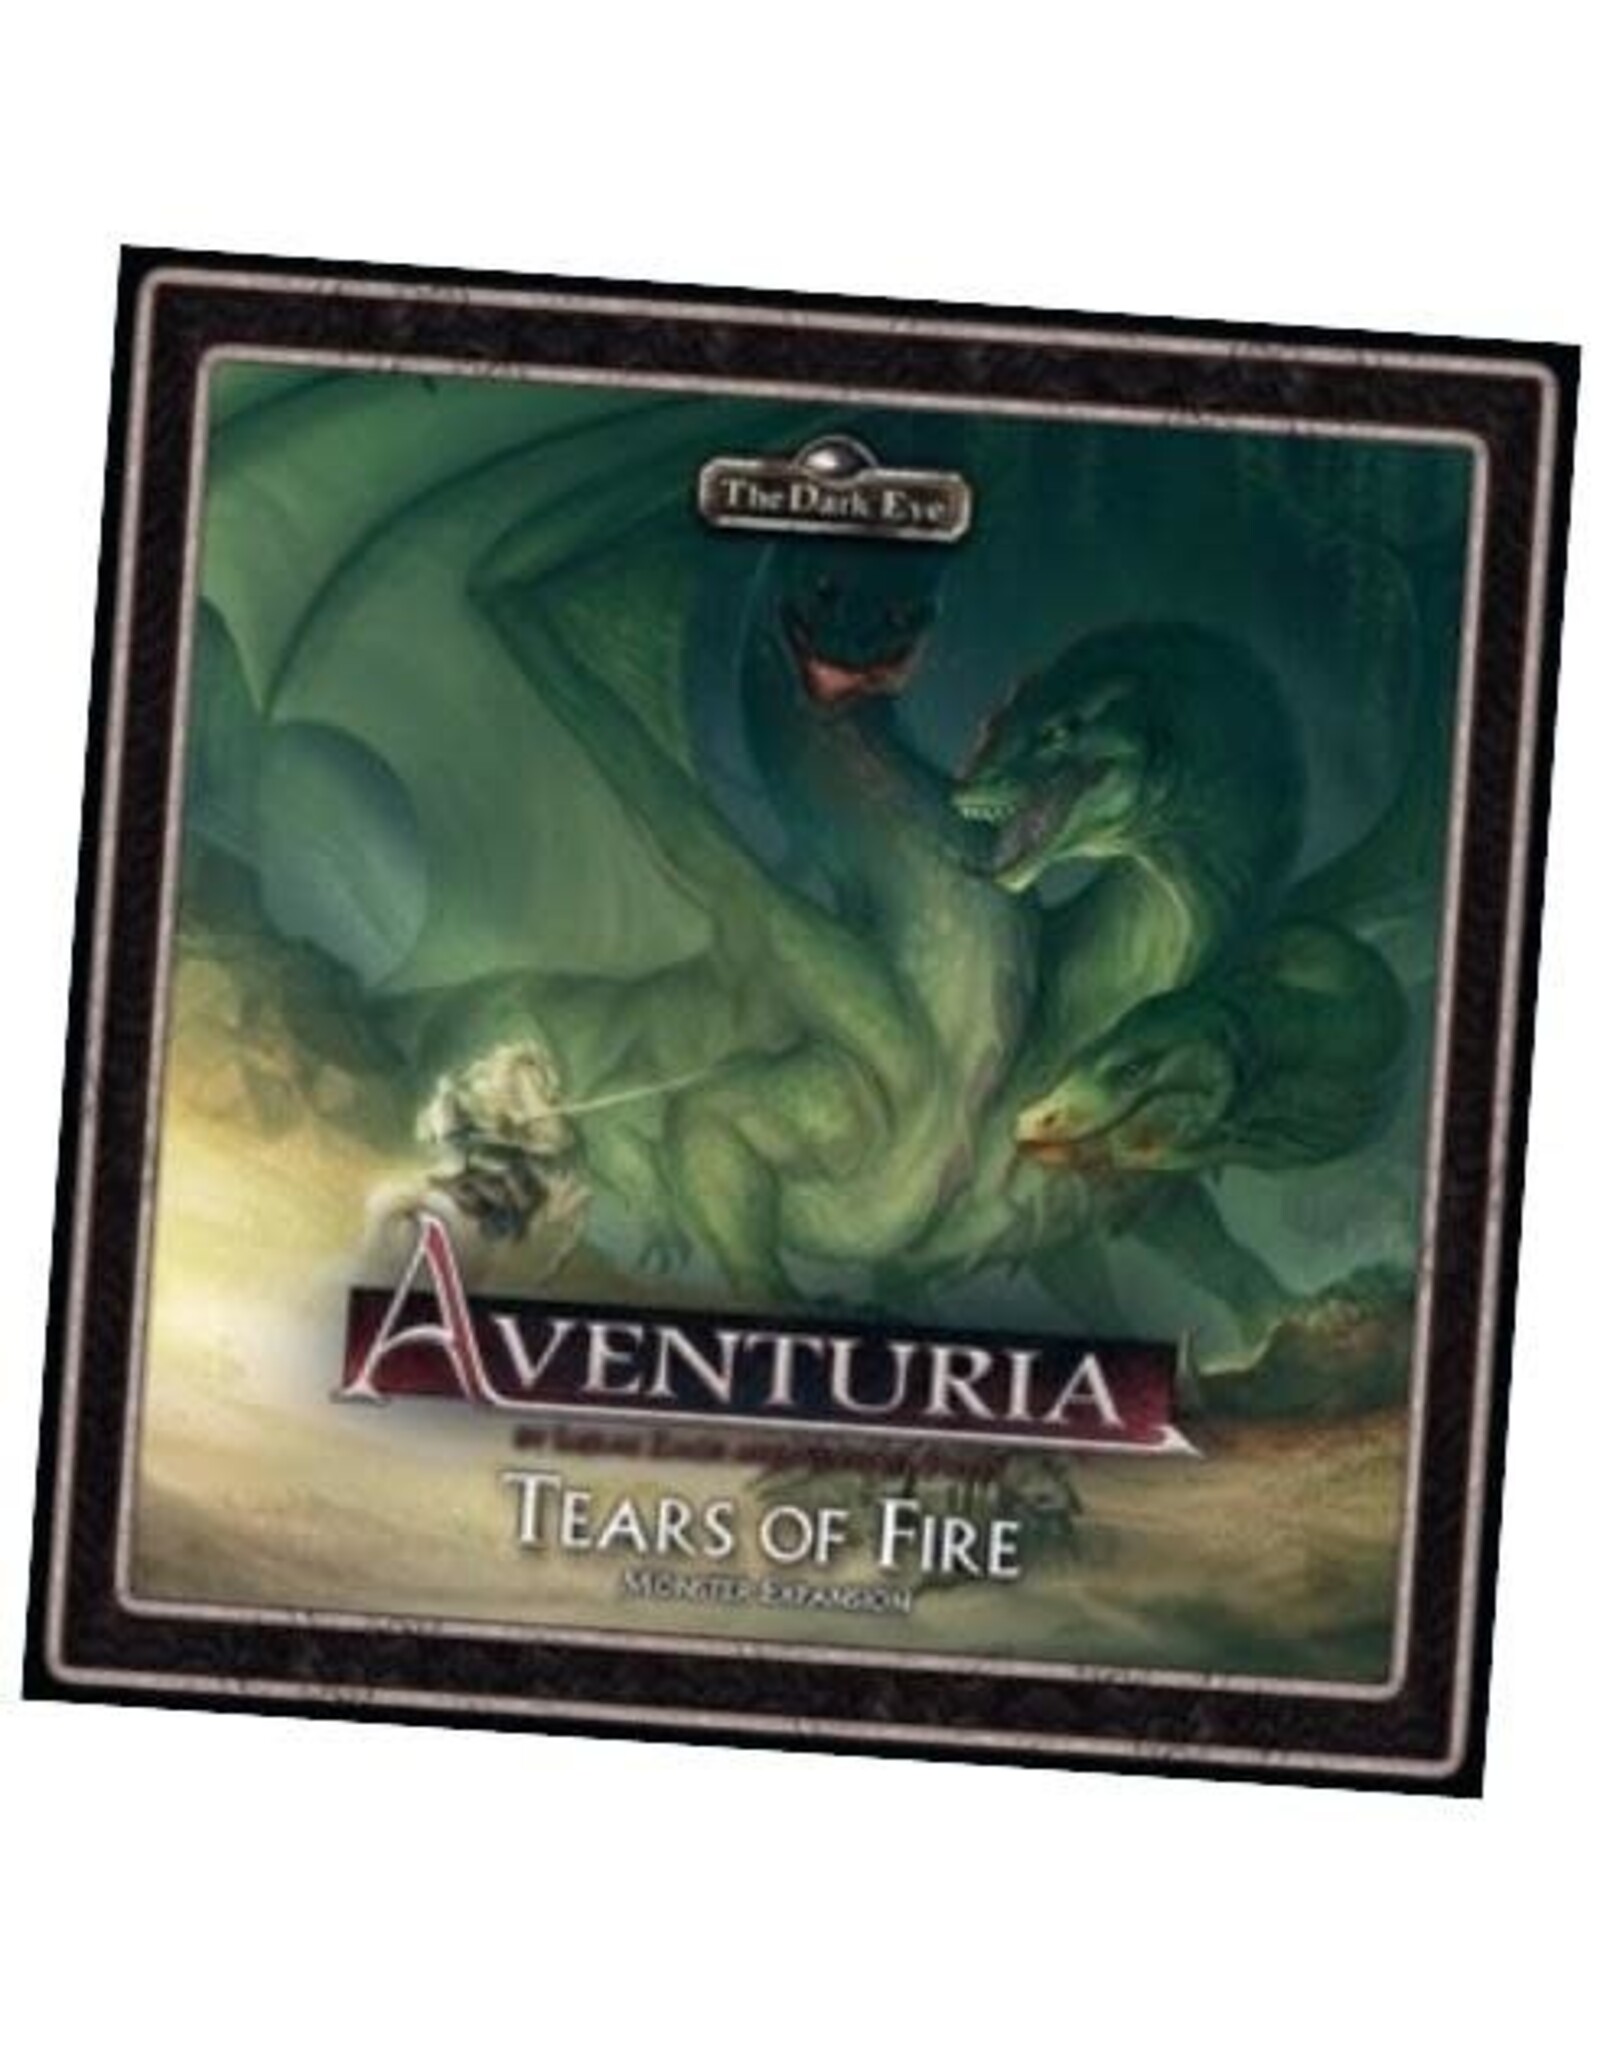 The Dark Eye: Aventuria Adventure Card Game - Tears of Fire Expansion